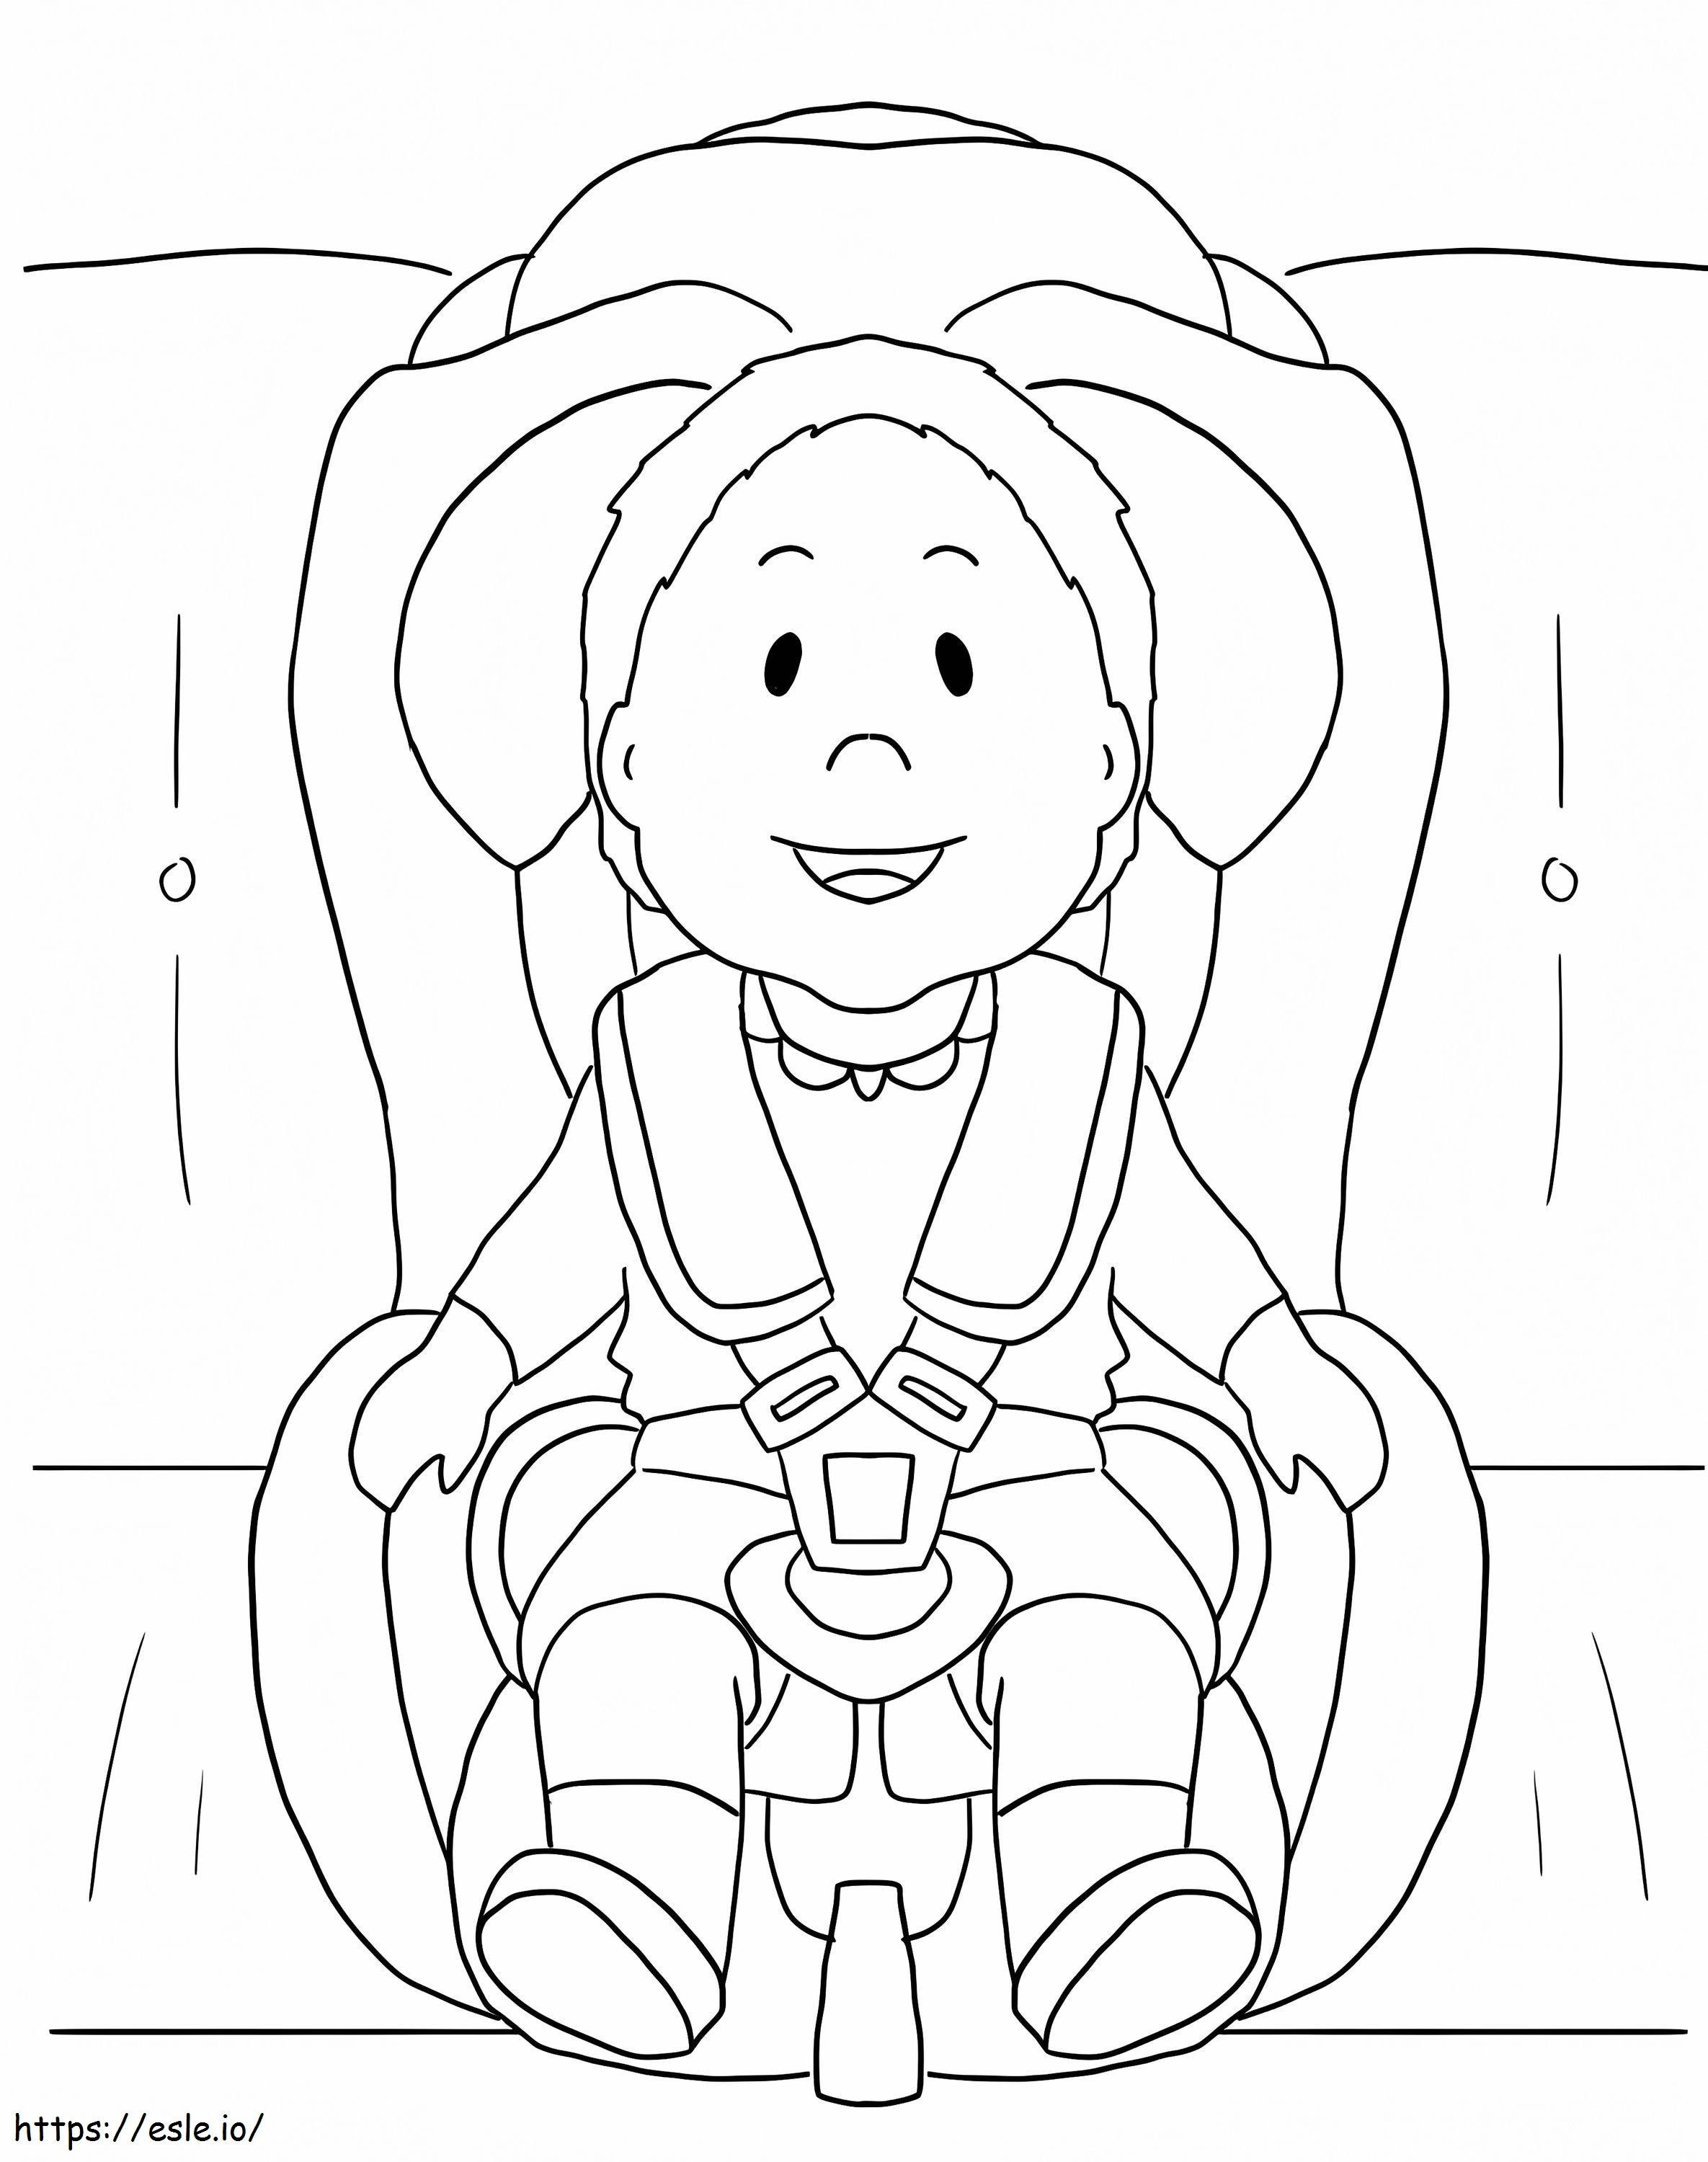 Car Seat Safety coloring page